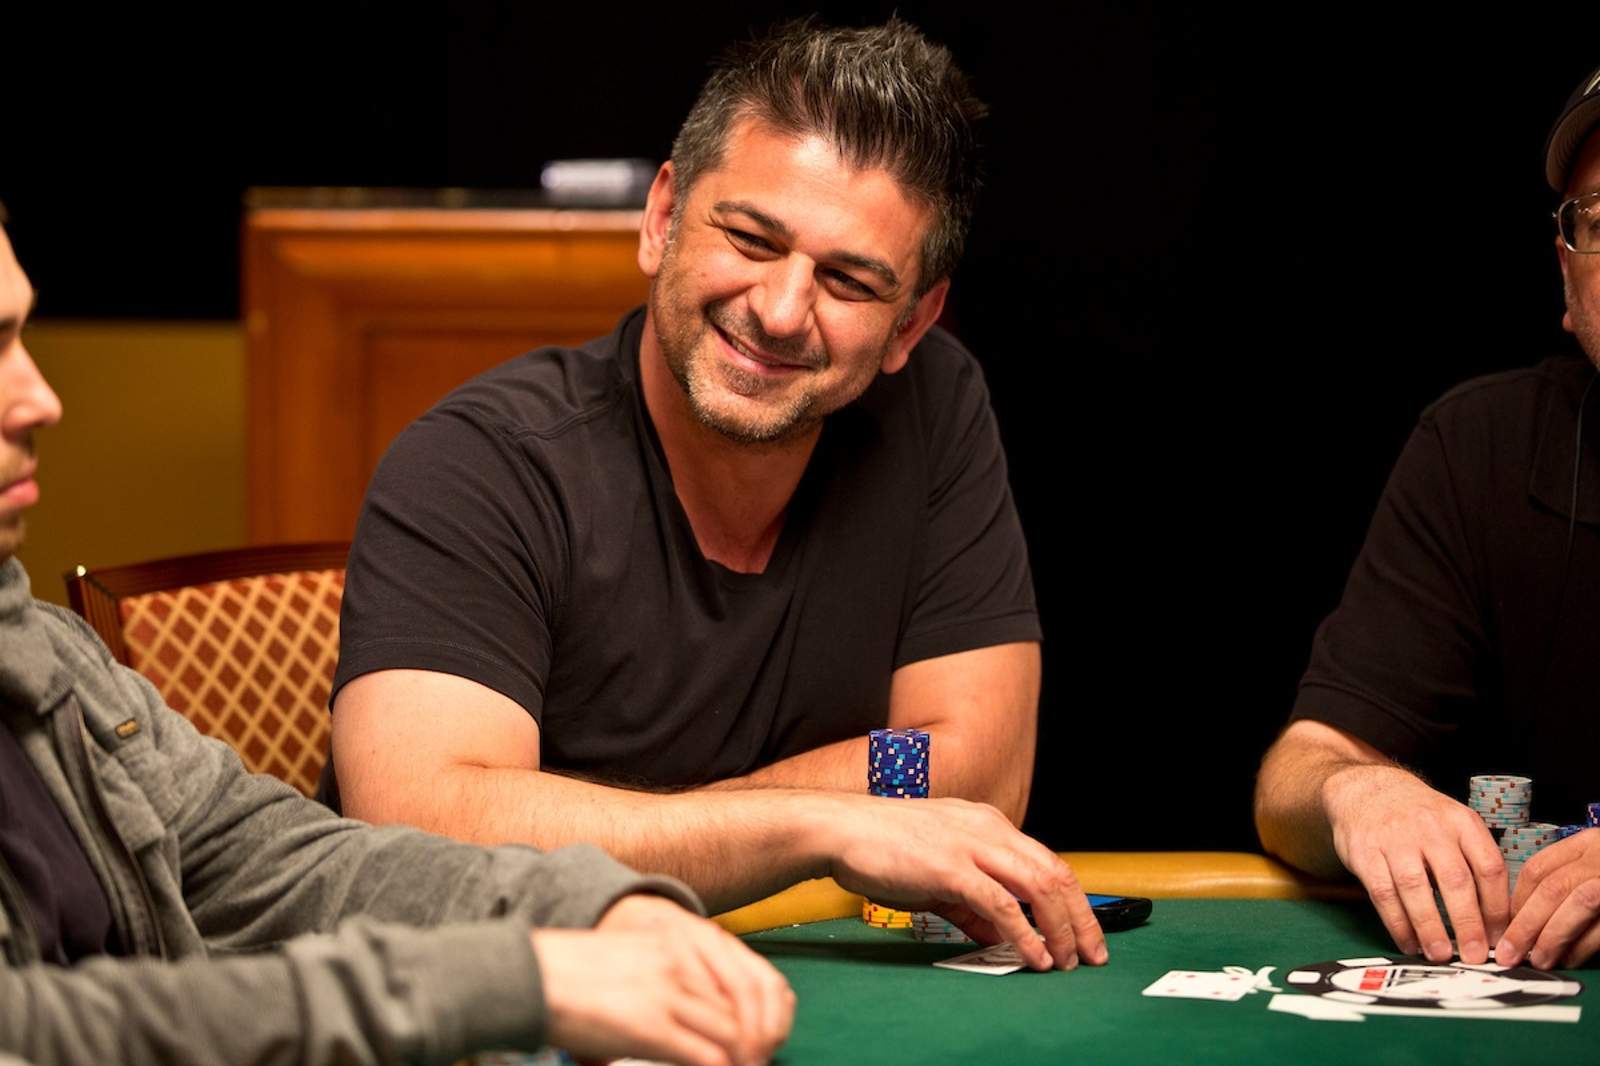 Poker After Dark: The Hecklers Come to Play